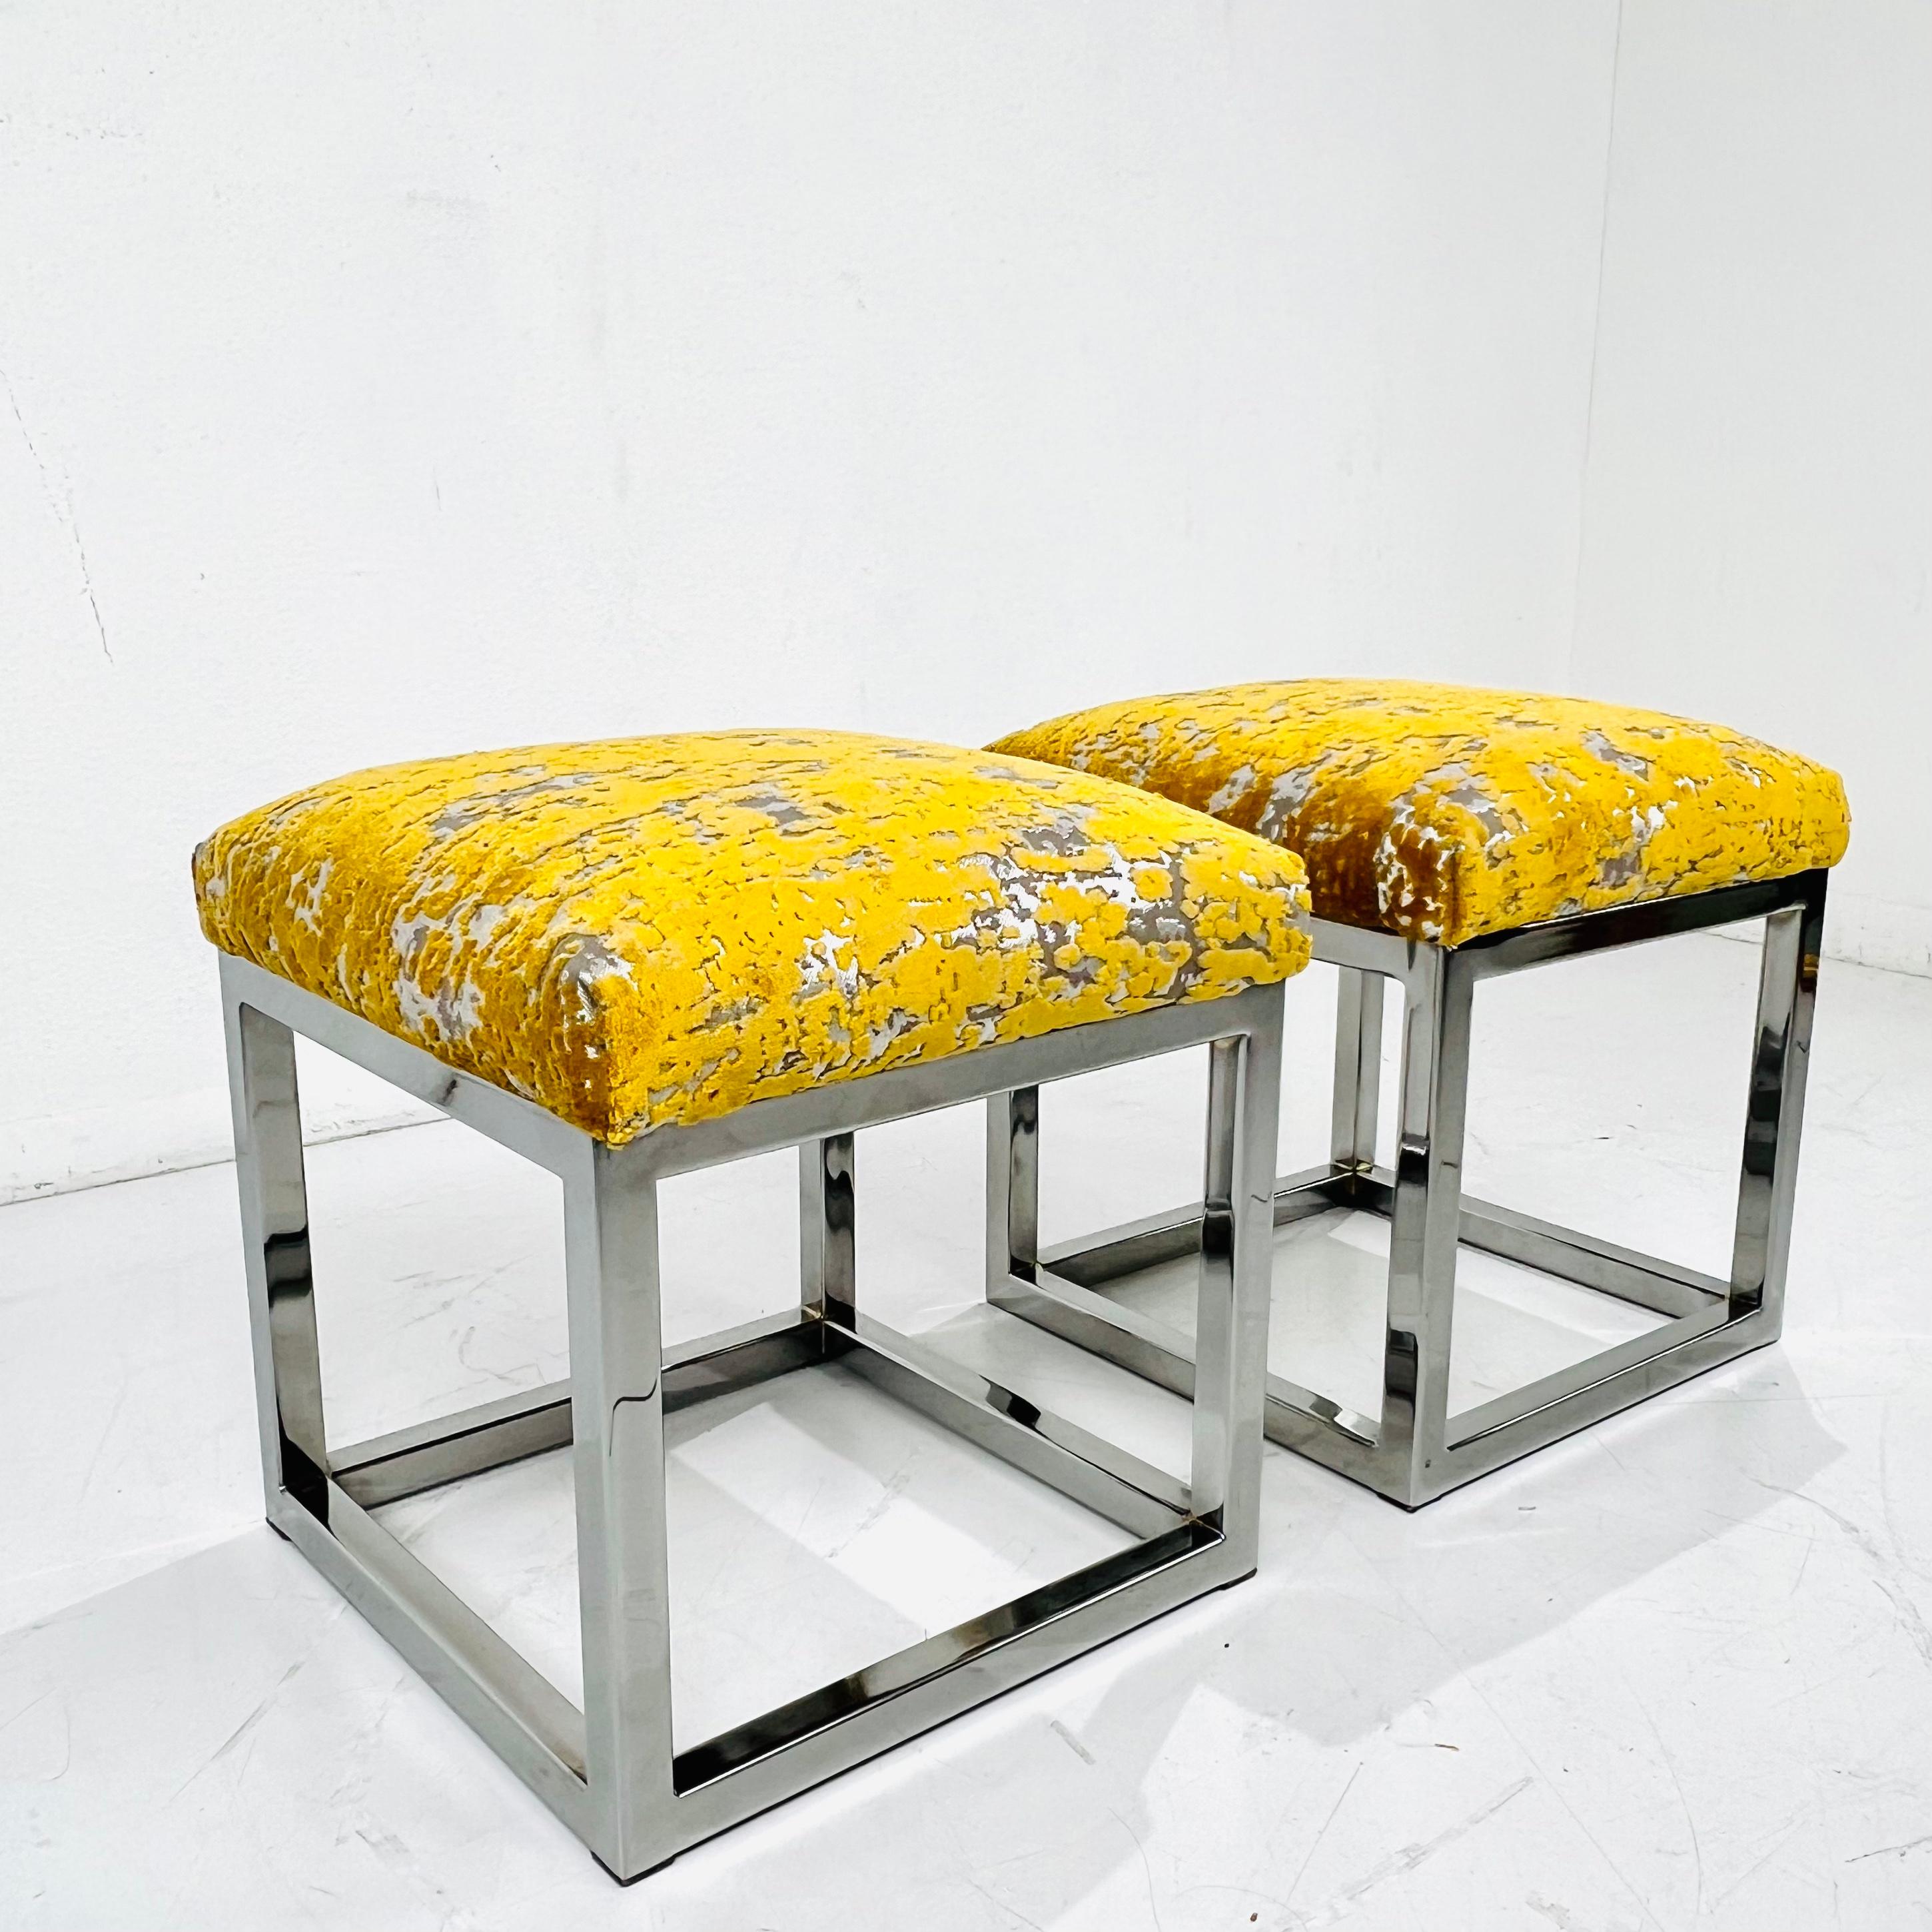 Pair of vintage footstools/ottomans featuring new designer velvet upholstery and sleek chrome frames. Great as extra seating. Frames in good condition with some minor pitting/imperfections to chrome. Upholstery in excellent condition.